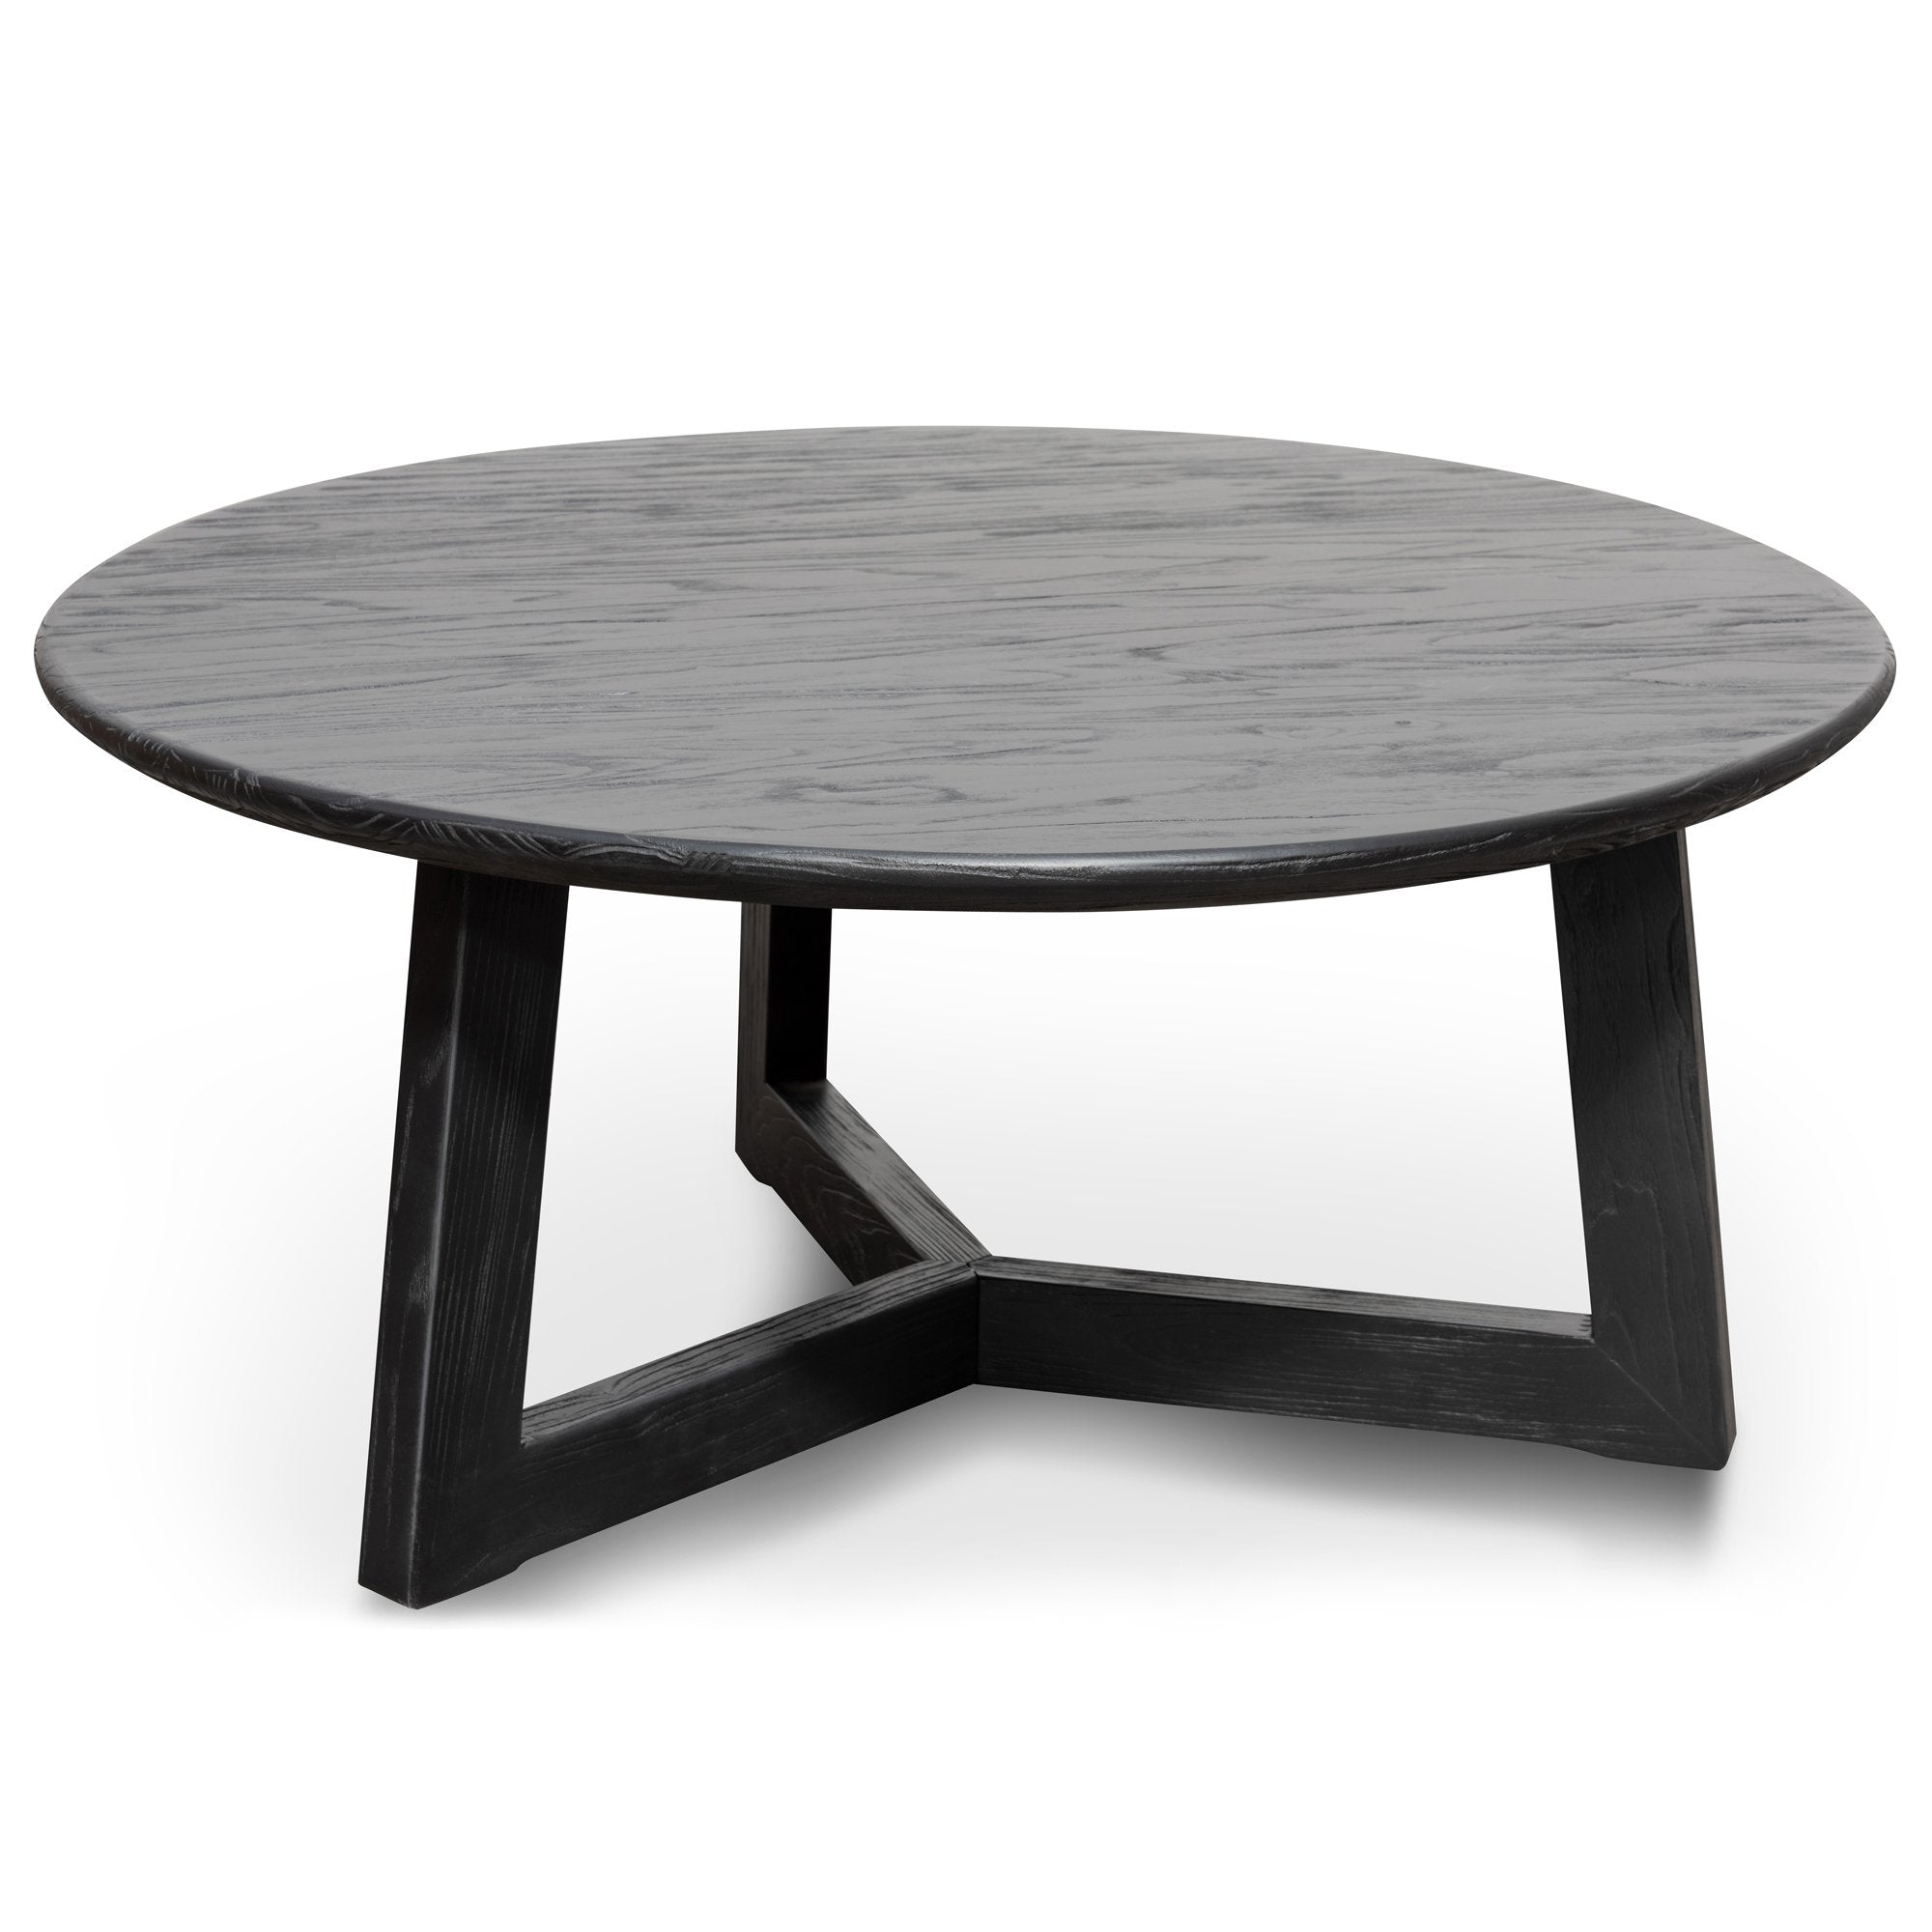 Elise Wooden Round Coffee Table - Coffee Table